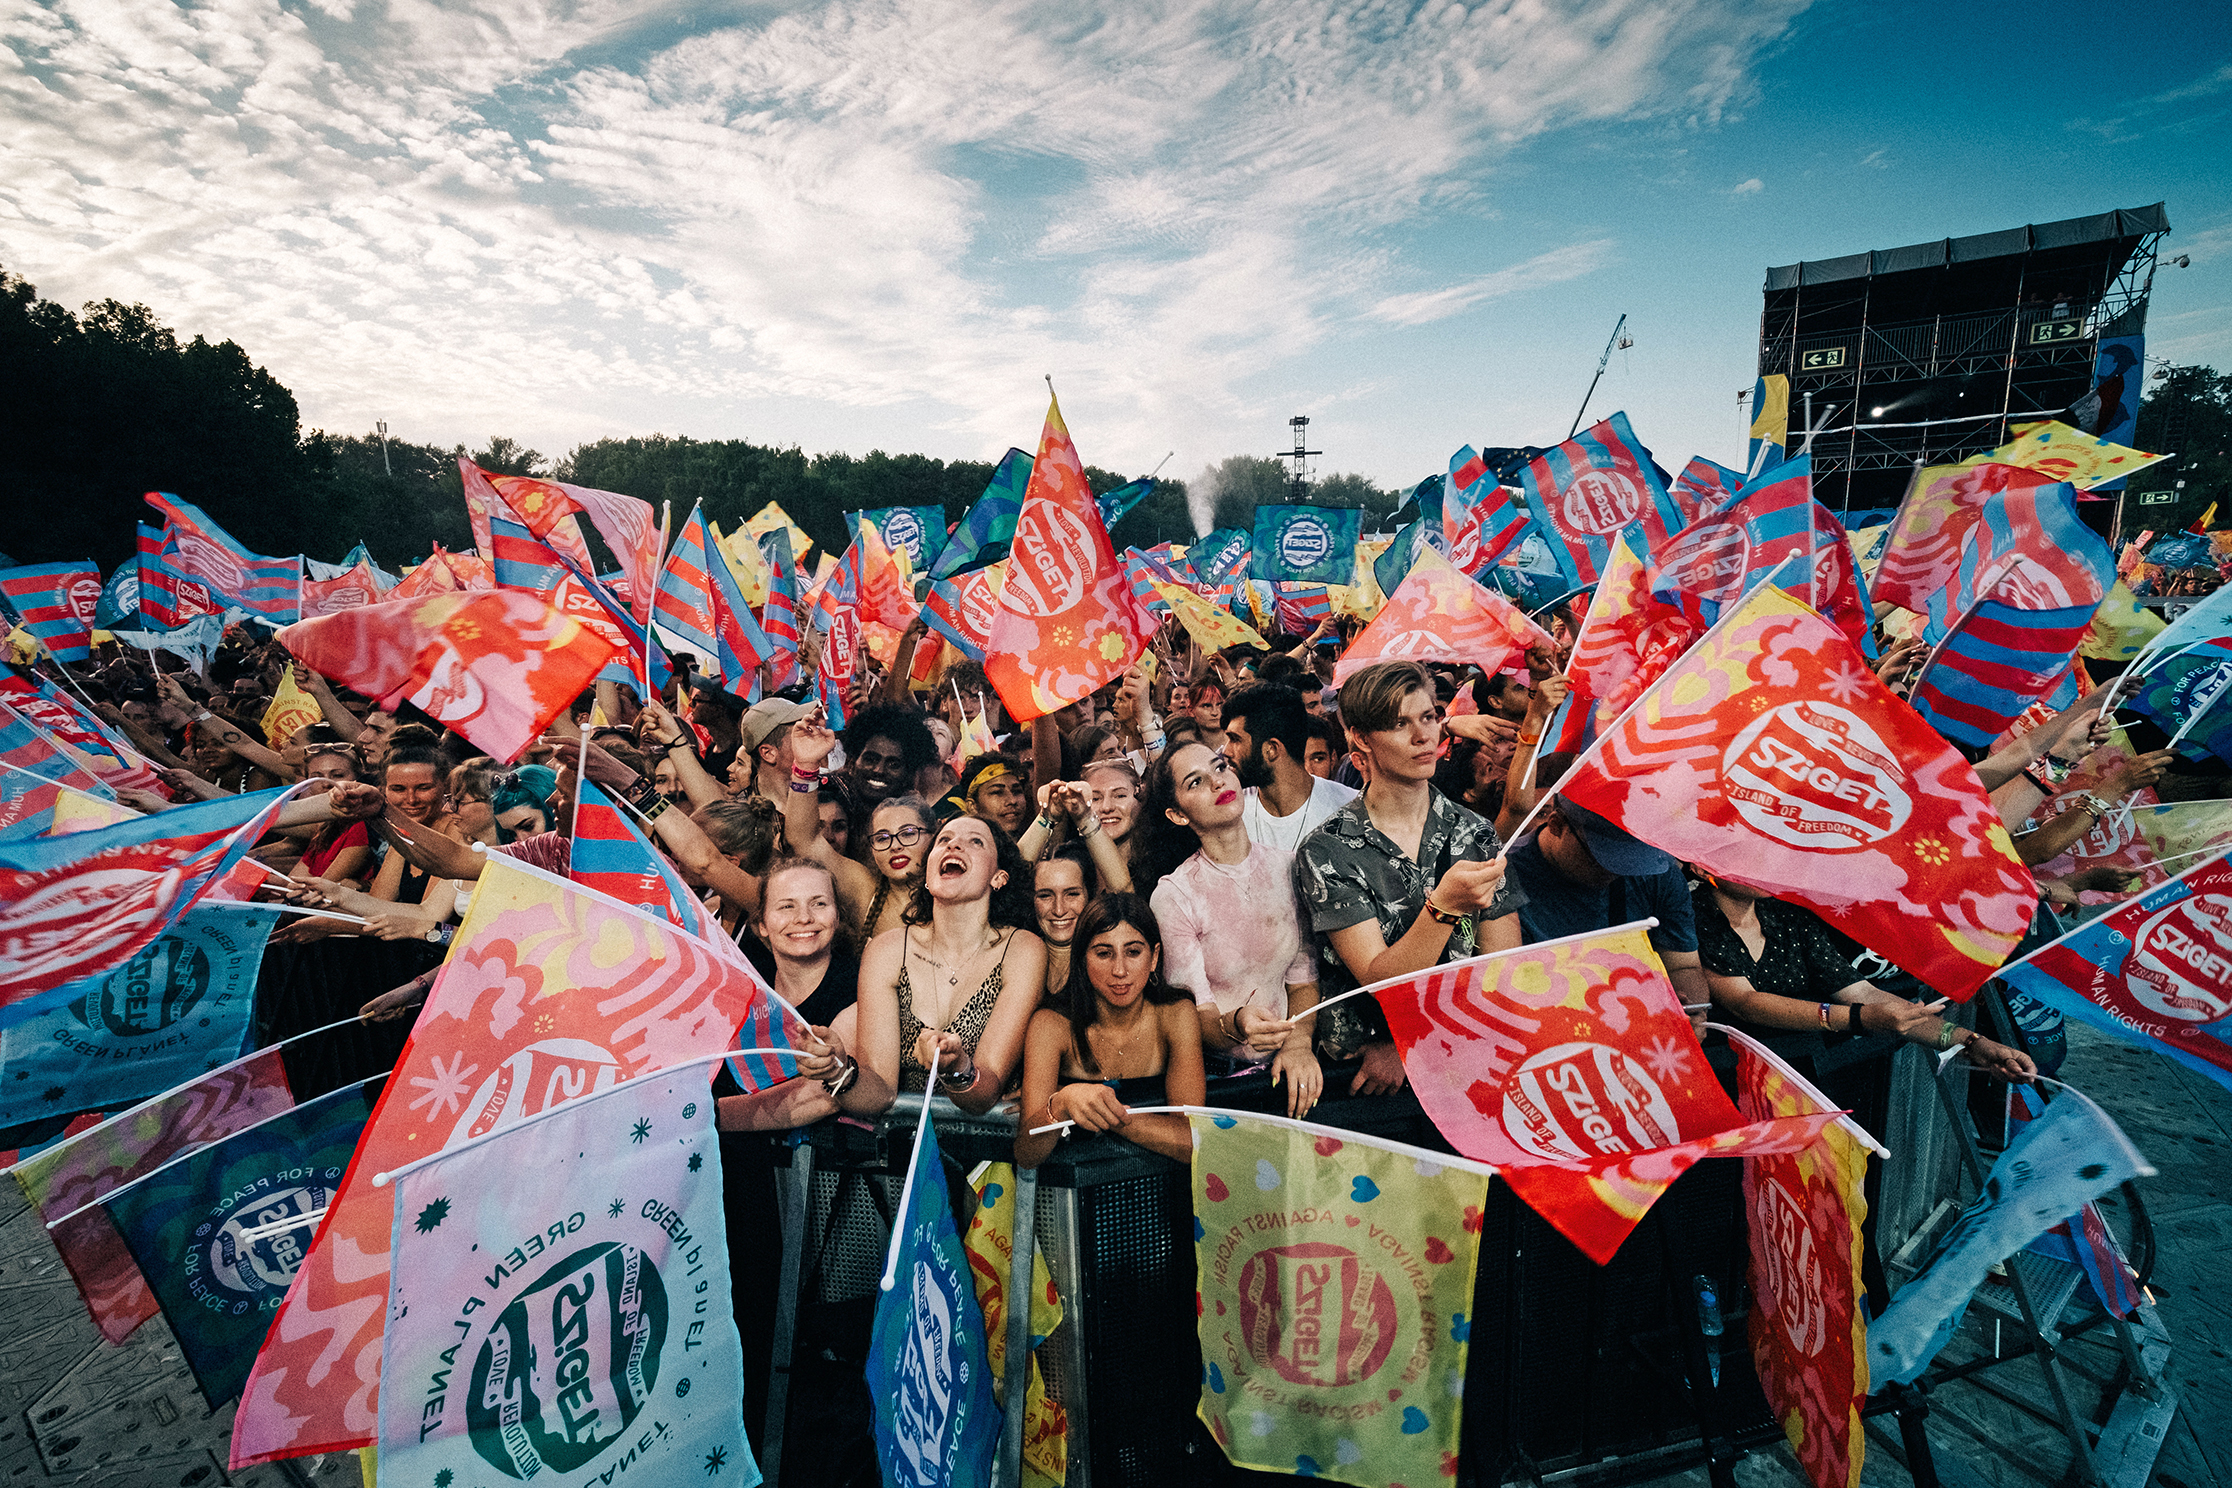 'Love Revolution Special' to return to Sziget Main Stage